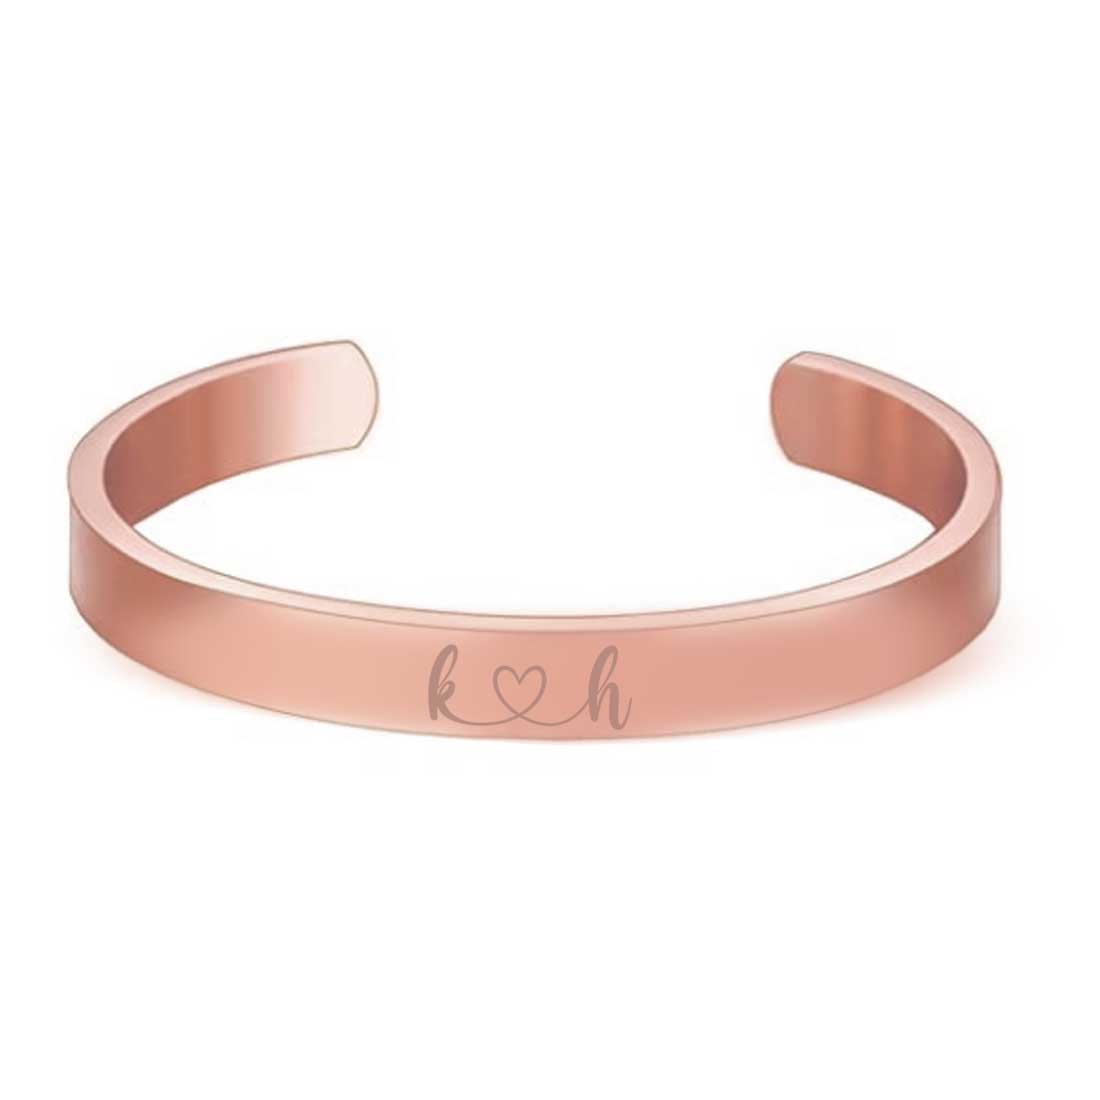 Customized Bracelets for Boyfriend Girlfriend Valentines Day Gift - Rose Gold Plated/Black Rhodium/Gold Plated